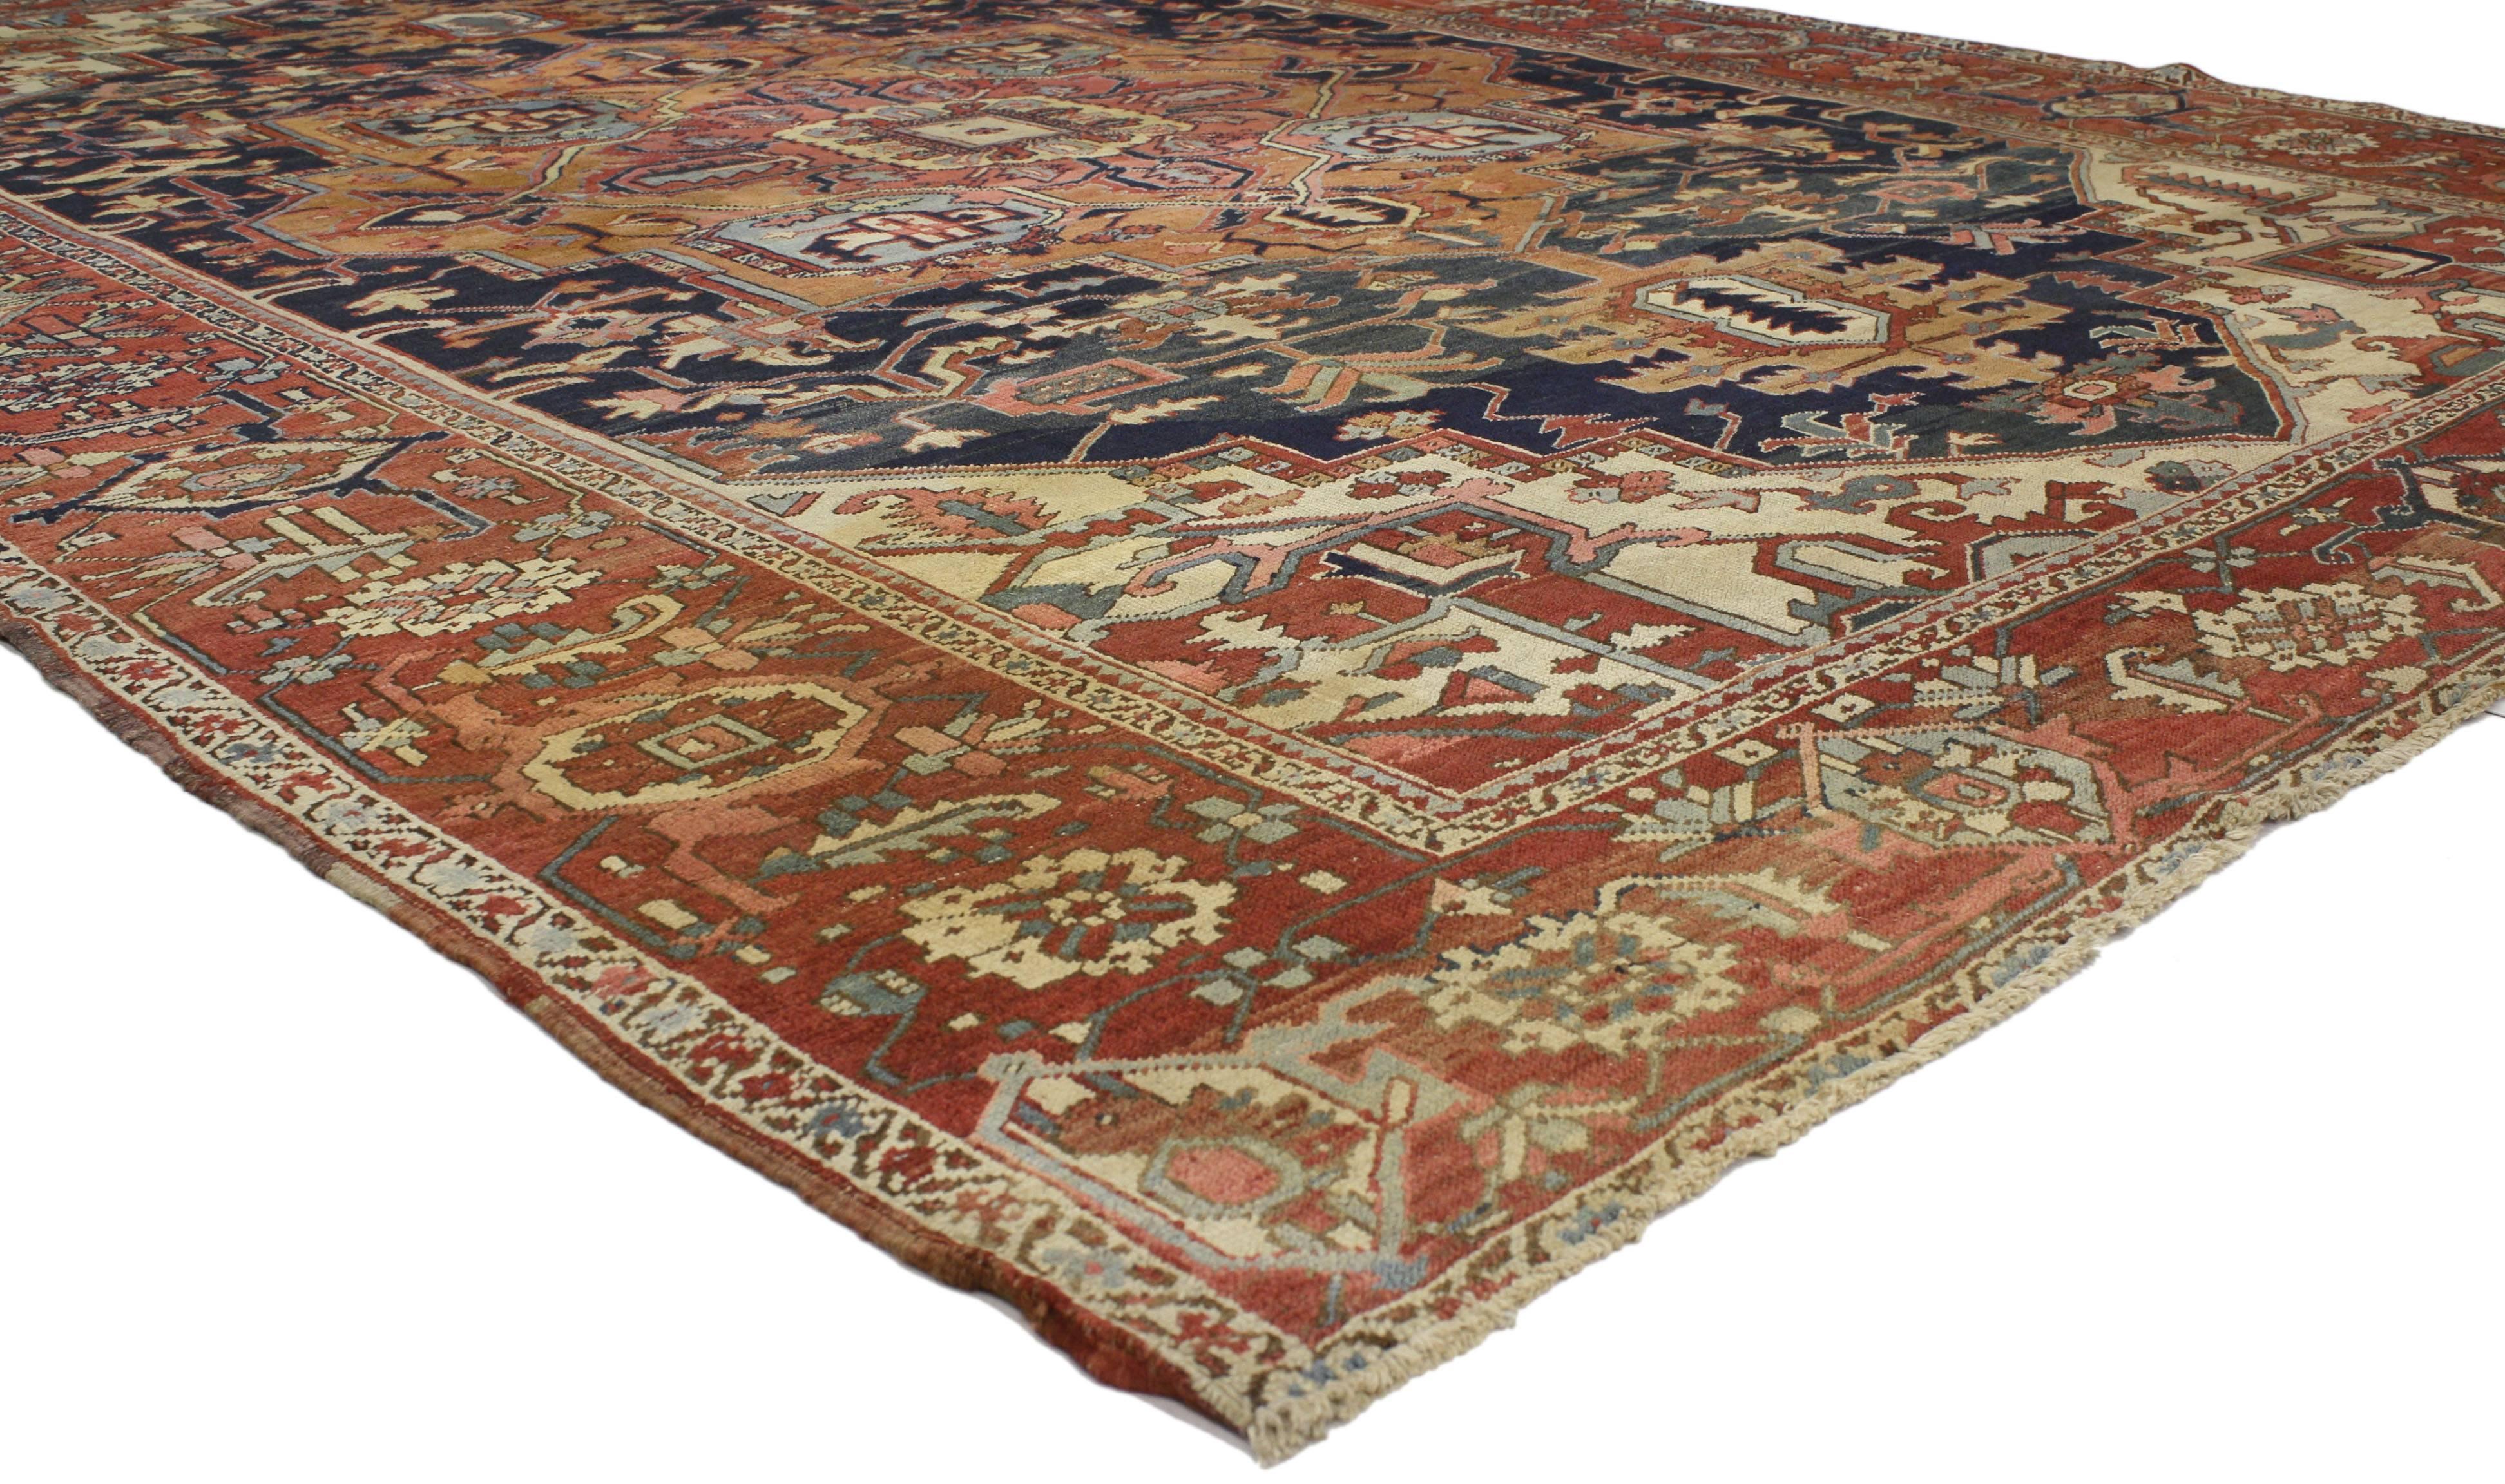 77051 antique Persian Serapi rug with traditional modern style. This antique Persian Serapi rug with traditional modern style features a relaxed, eclectic look that’s adaptable without a strict, coherent theme. From the large-scale center medallion